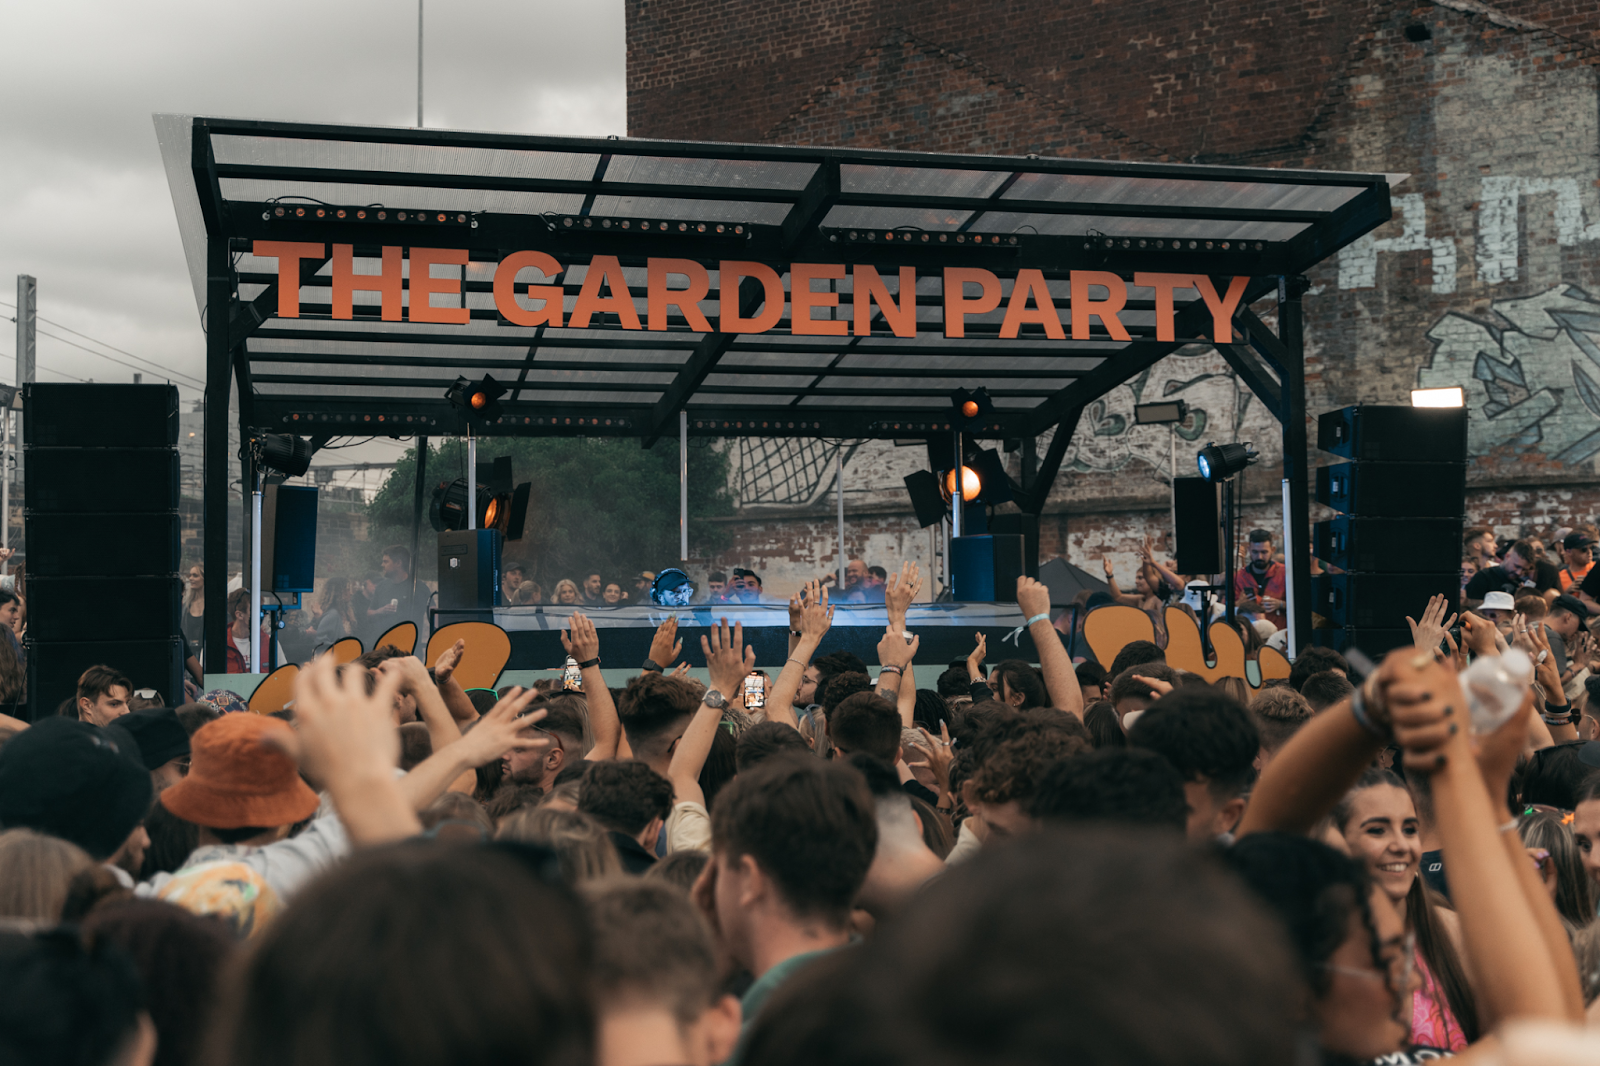 Leeds’ all new event space Canvas Yard has made a huge impact on the musical landscapes of the city in its first month